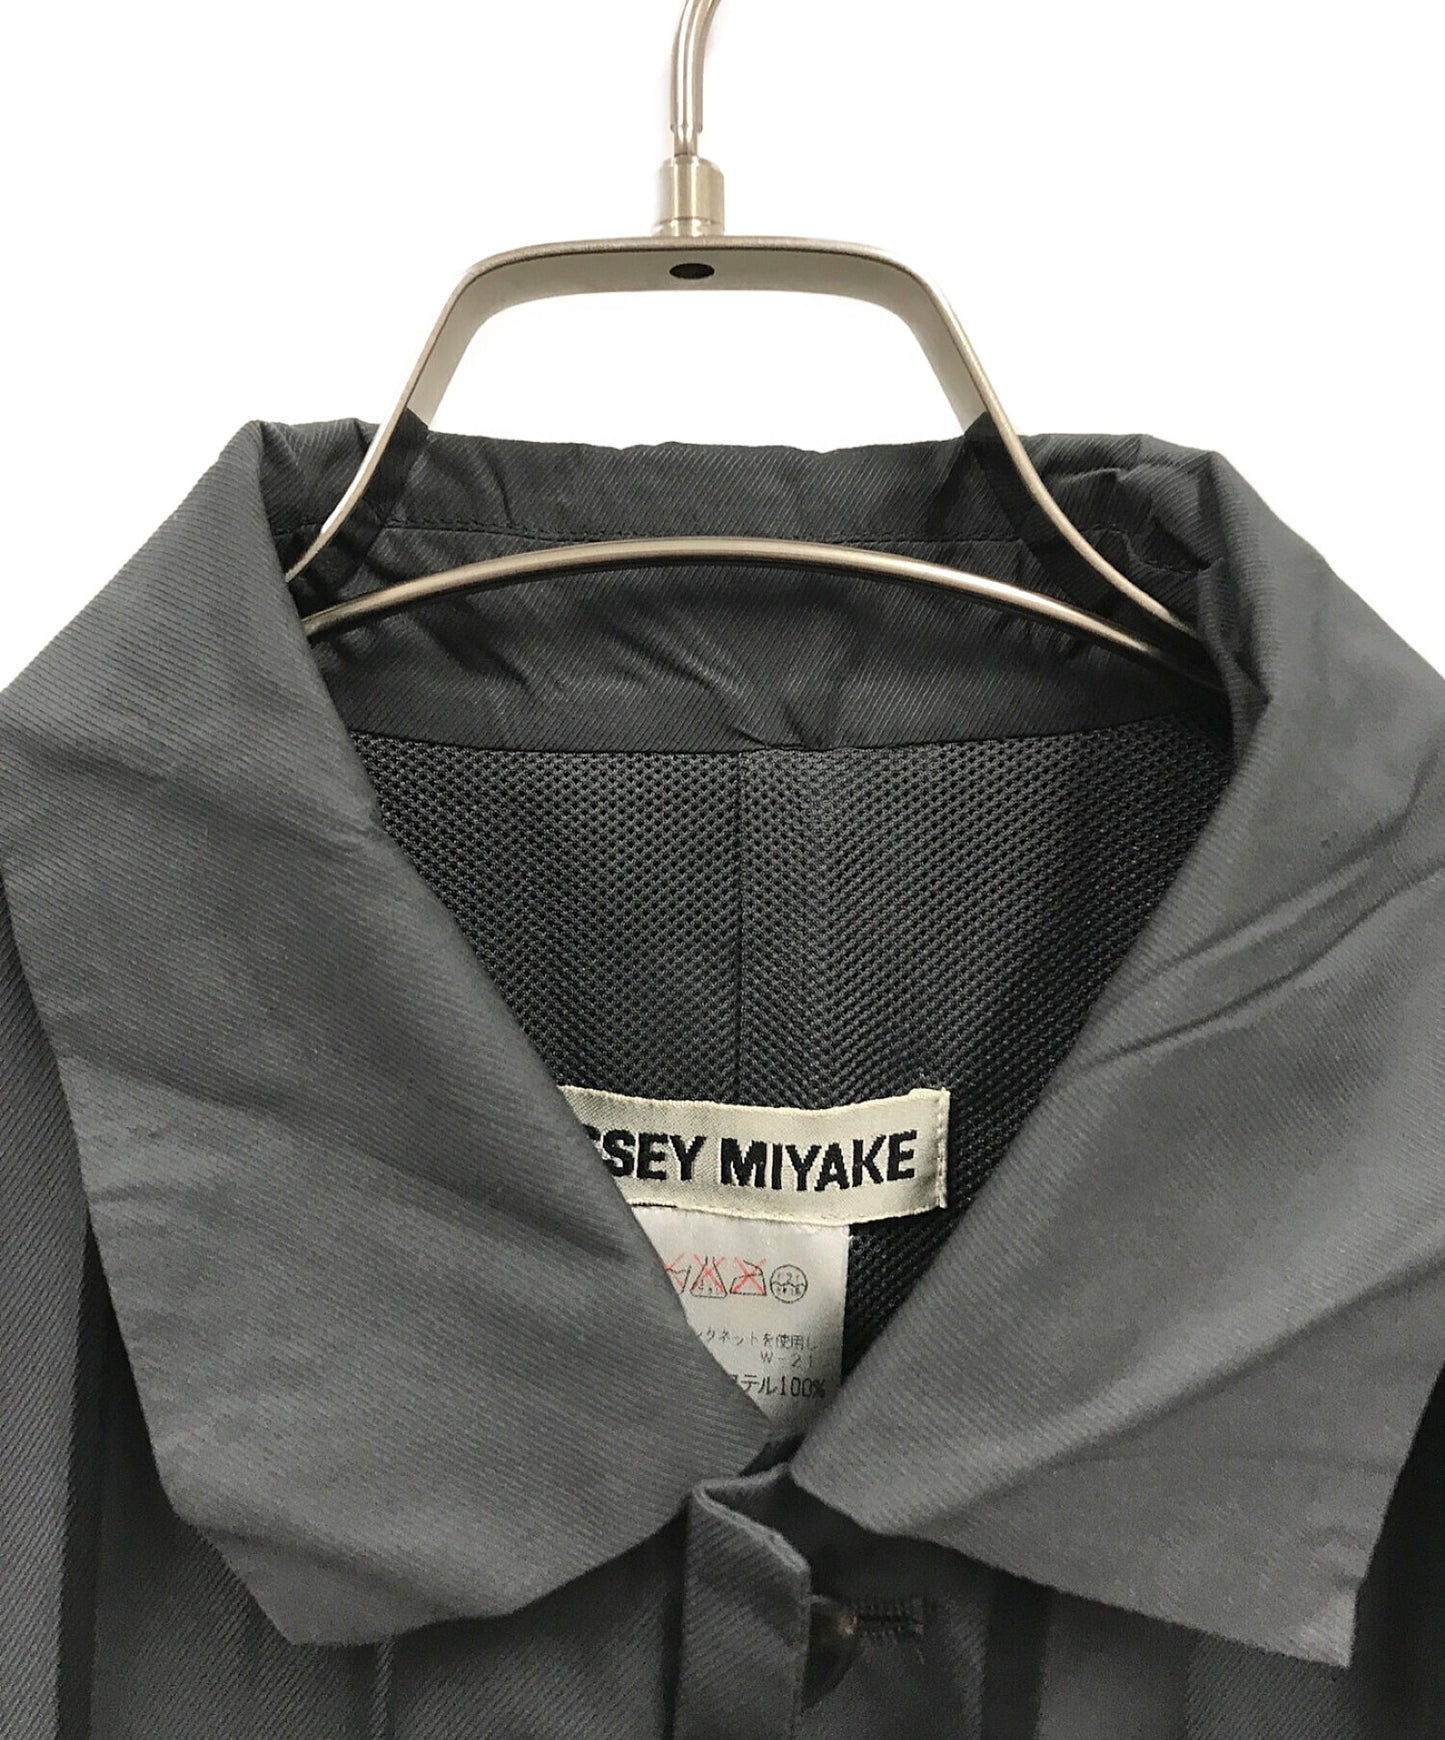 [Pre-owned] ISSEY MIYAKE Pleated shirt / Honjin period IM94-FD923